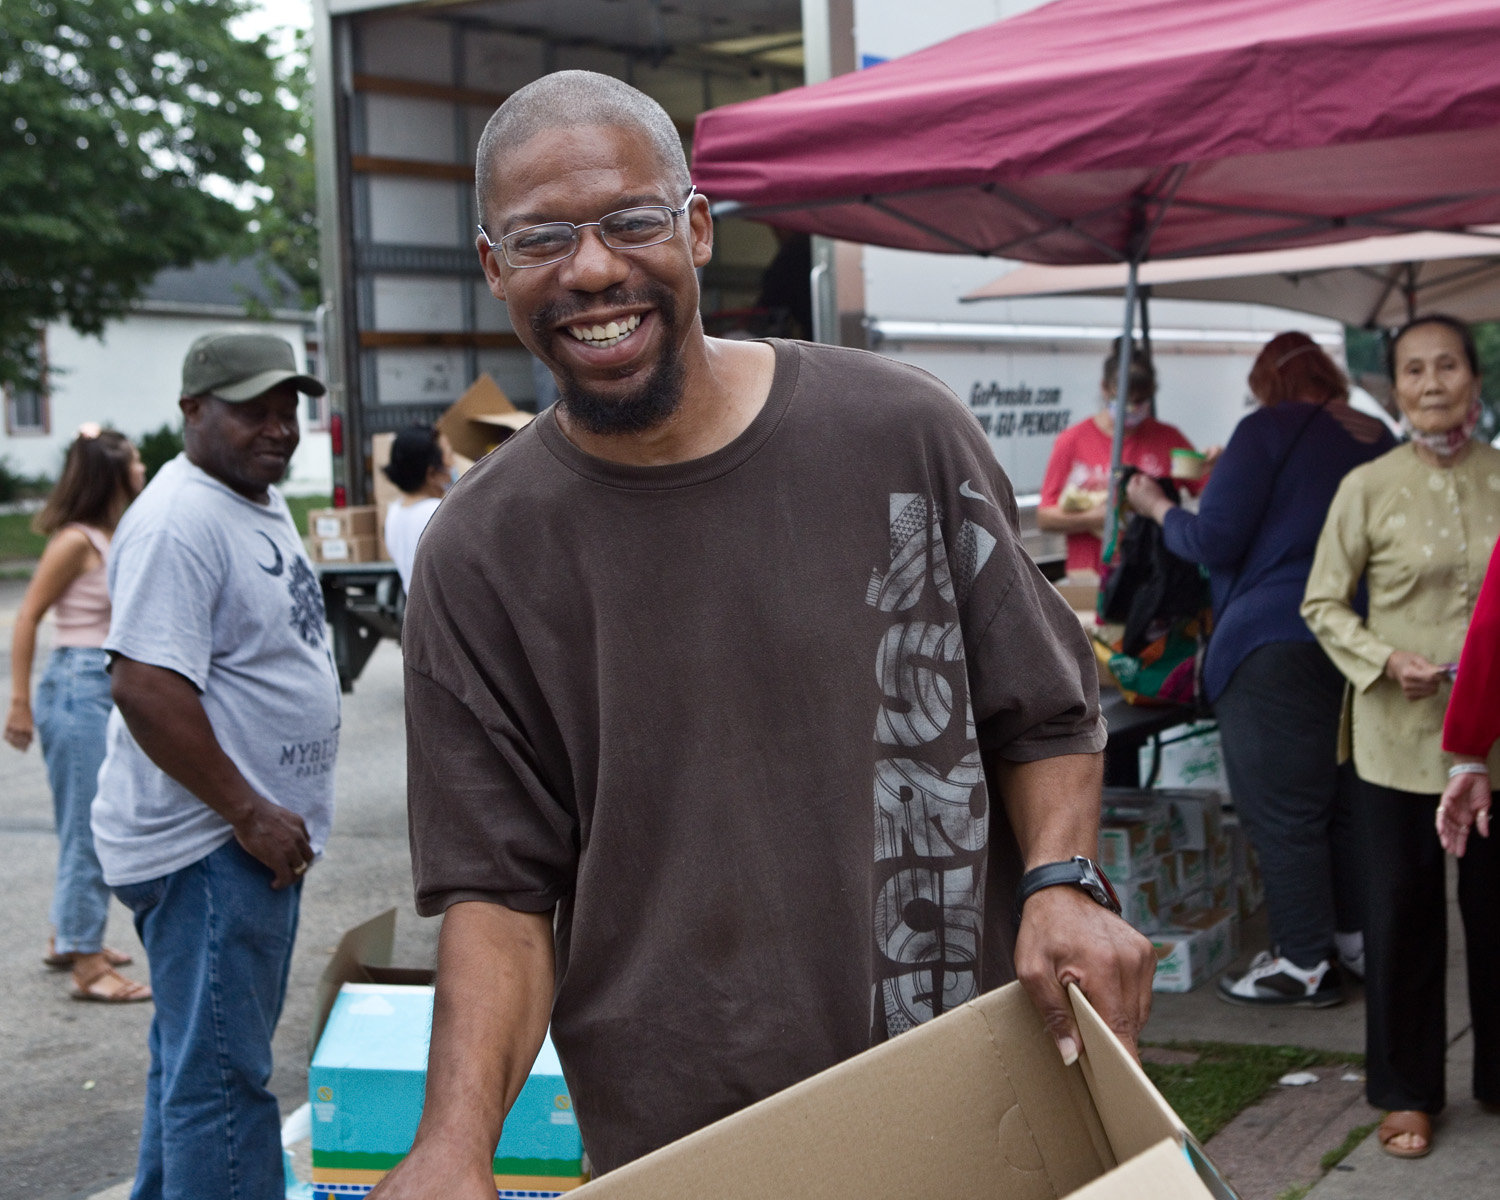 “Cart” Rob runs the business side of things, including logistics and coordination for helping feed the Frogtown neighborhood. (Photo by Margie O’Loughlin)